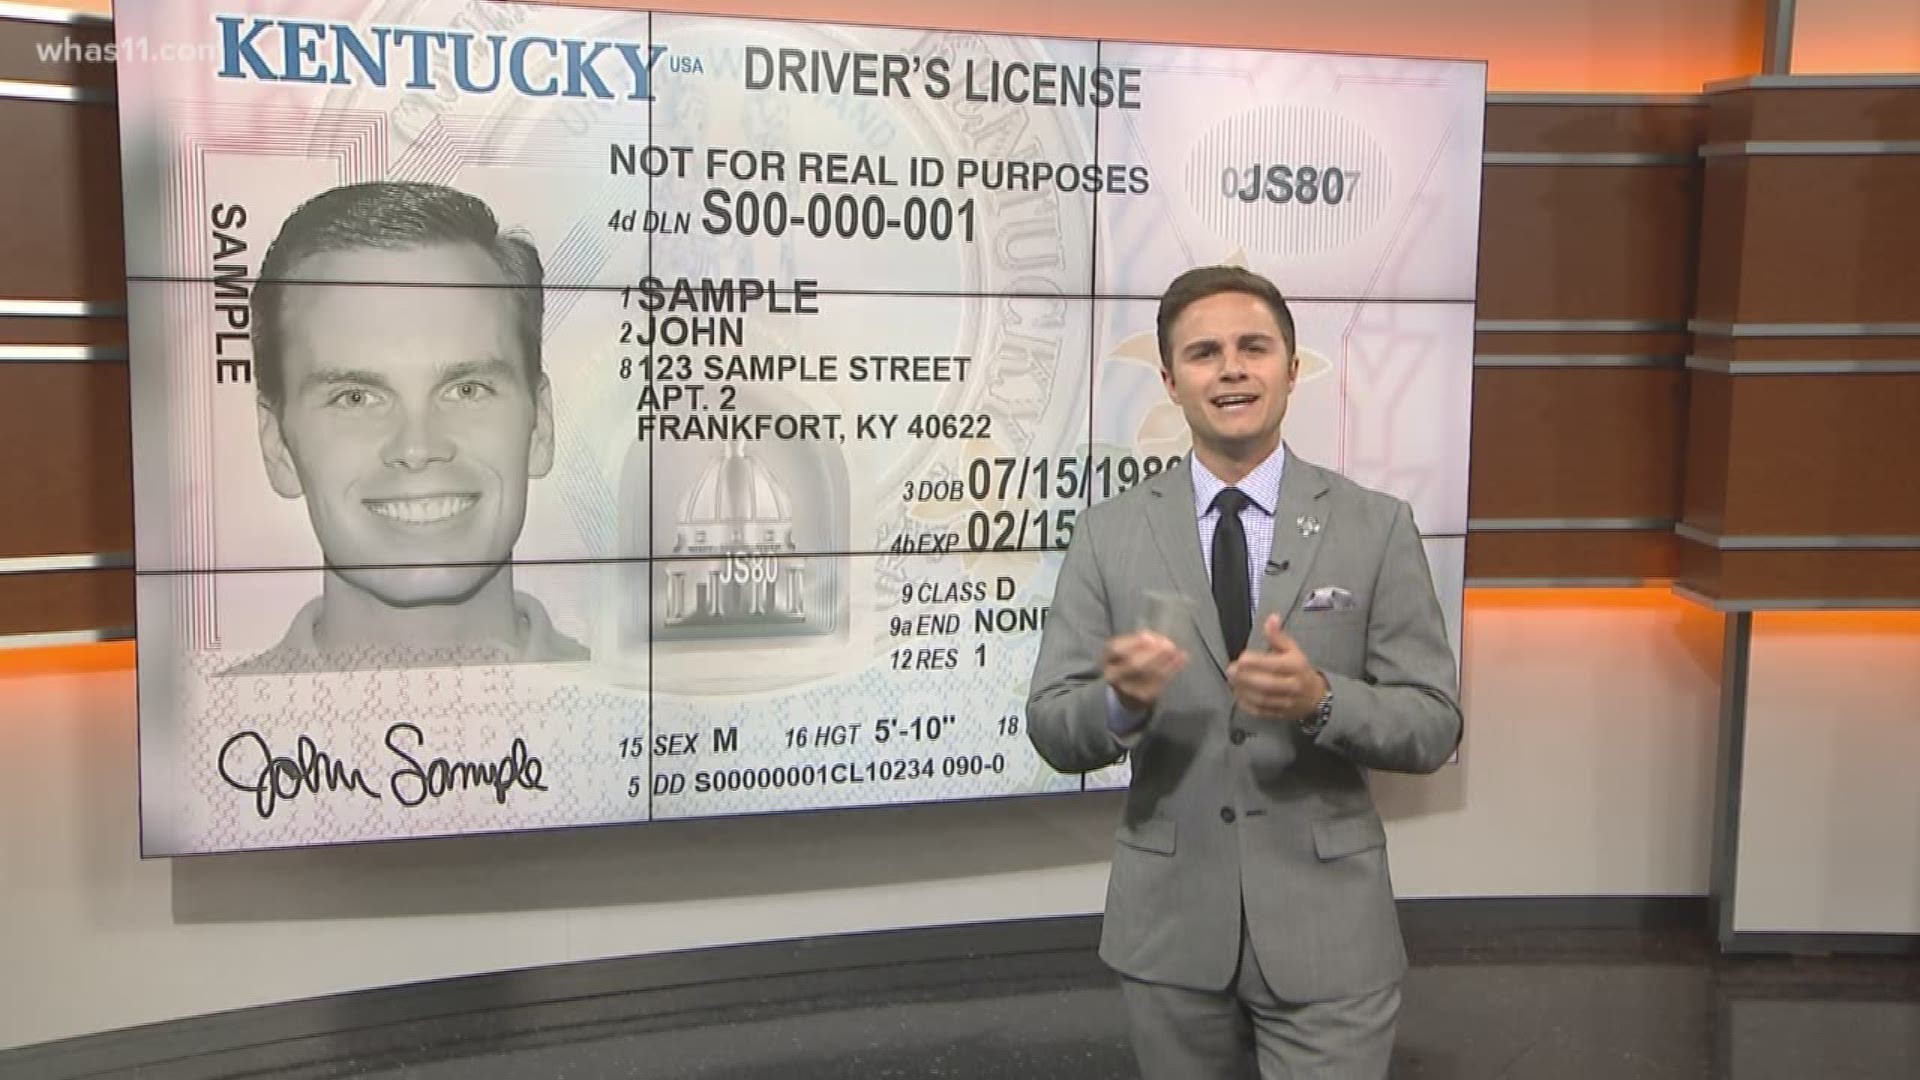 After several attempts, it sounds like the Kentucky Transportation Cabinet is finally going to roll out those new driver's licenses.